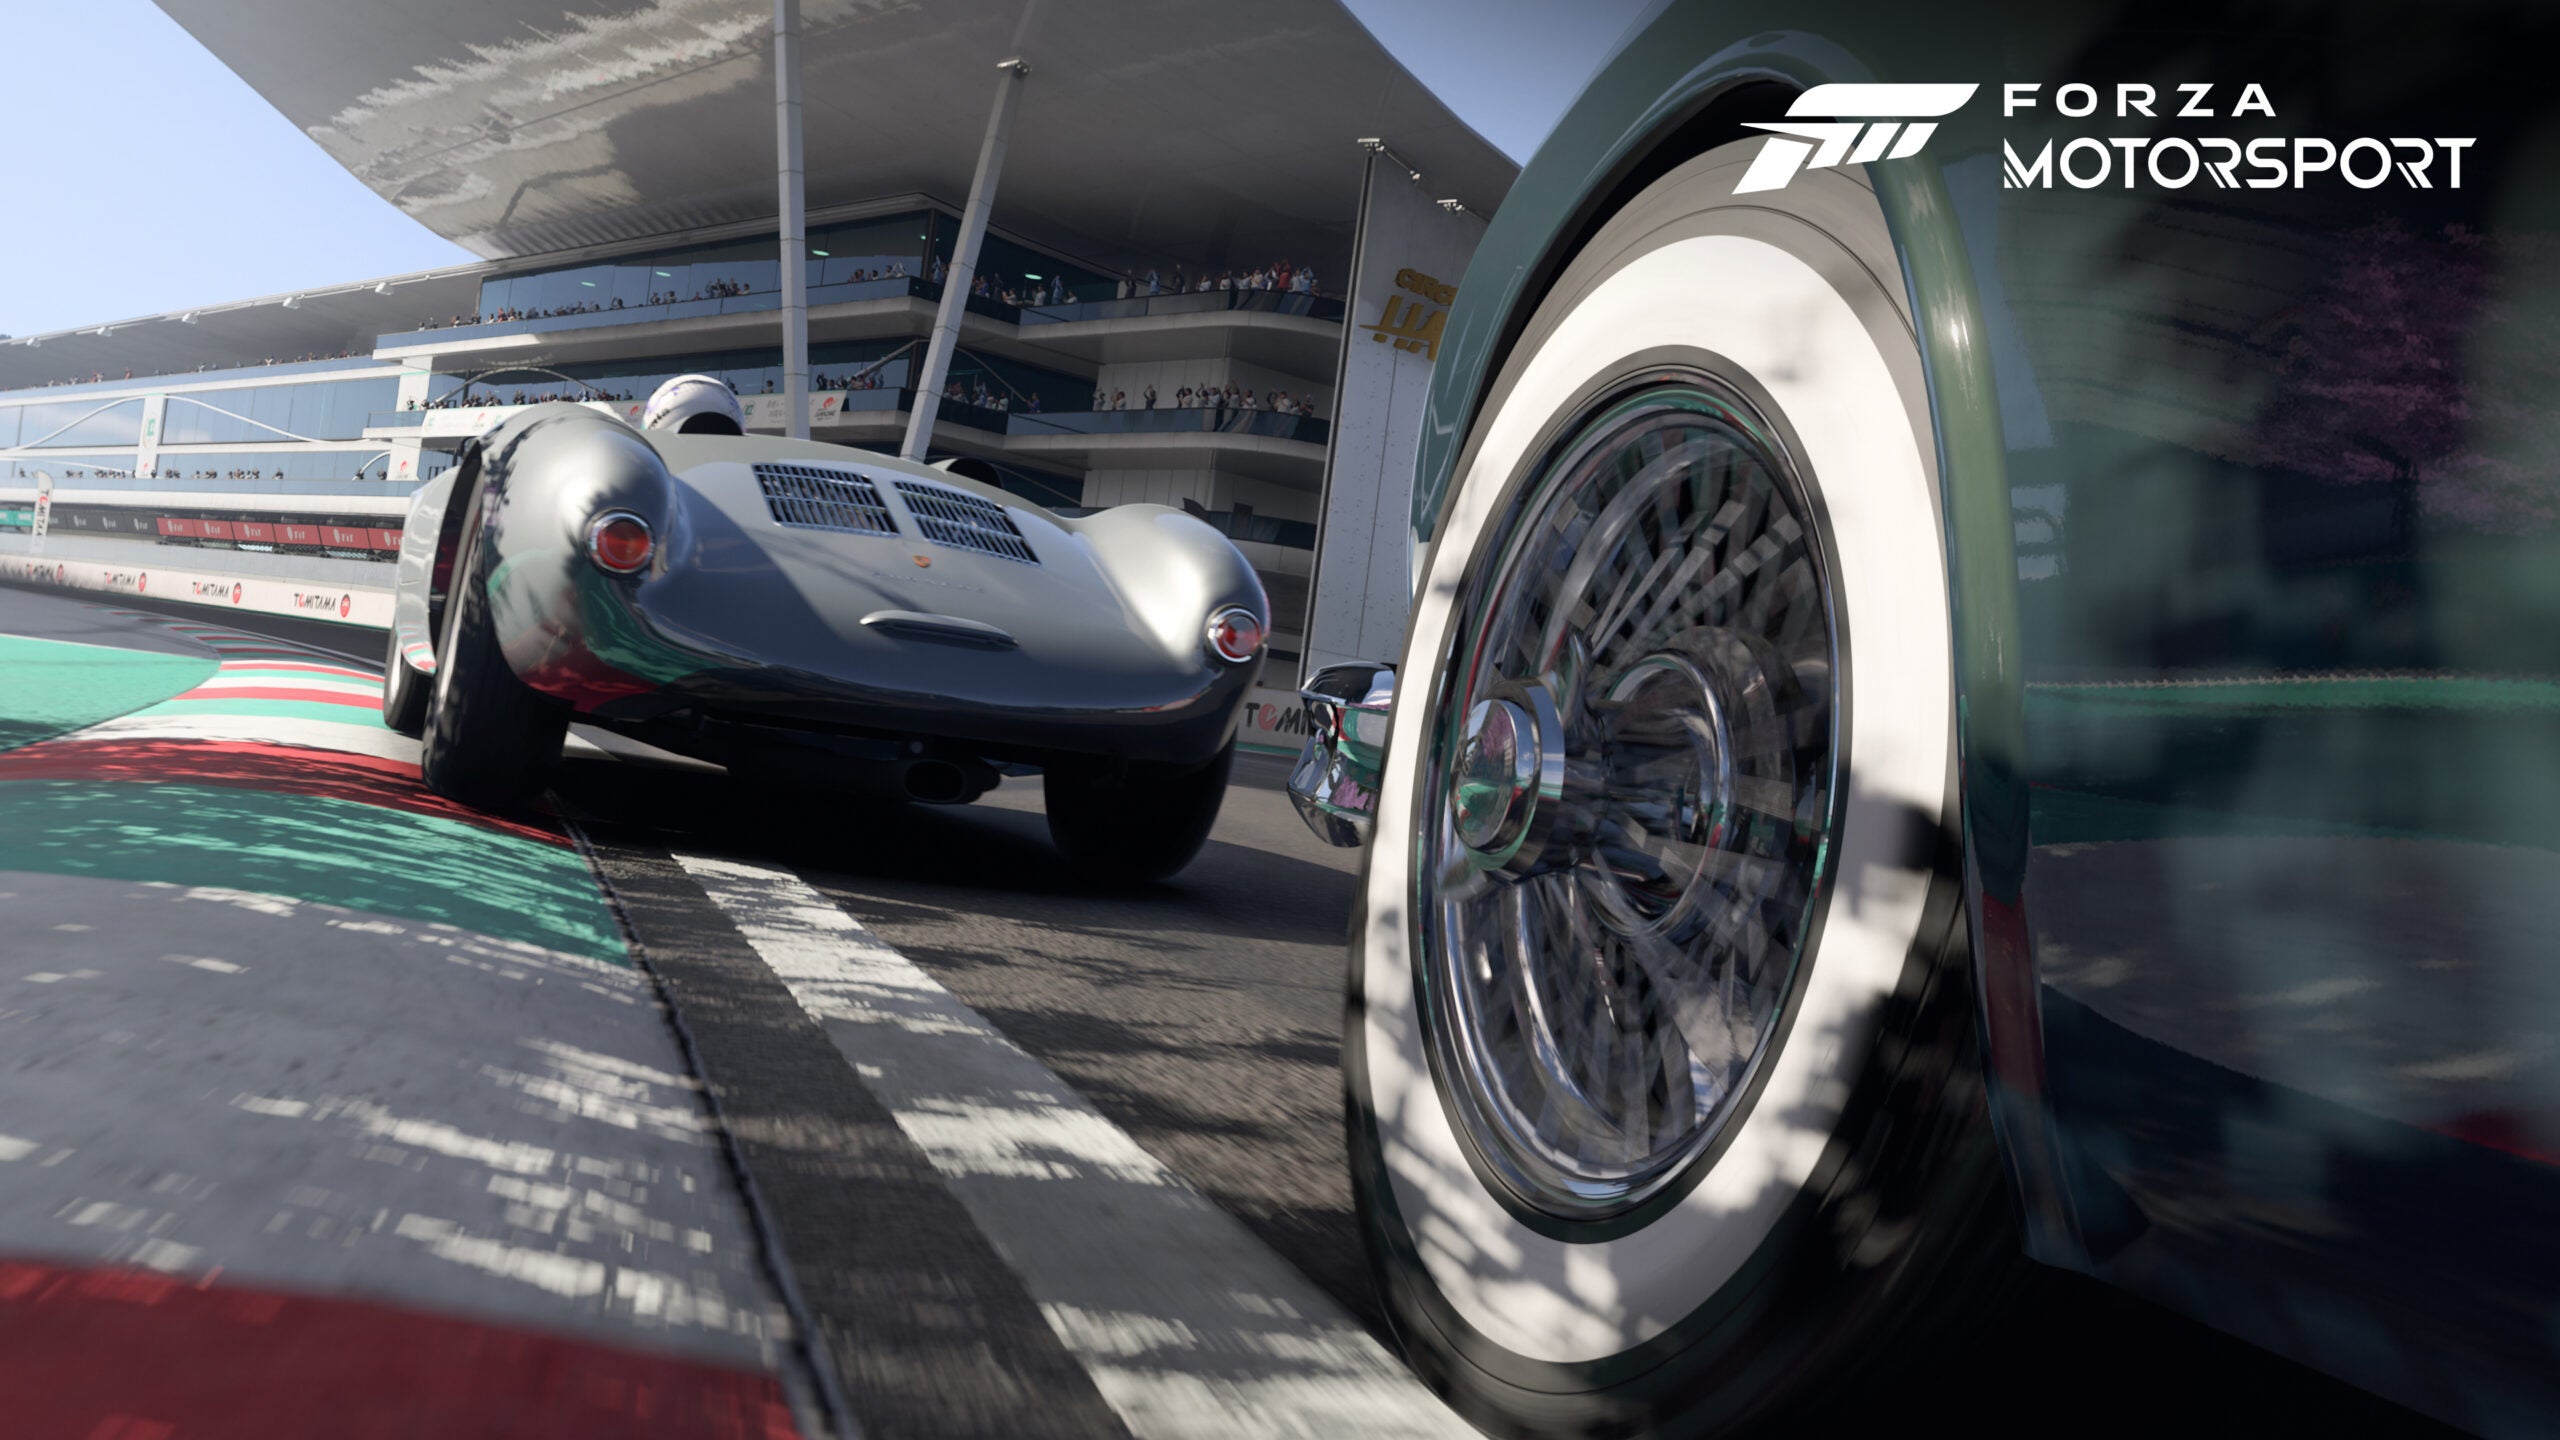 Forza Motorsport Finally Hits Xbox Series And PC October 10